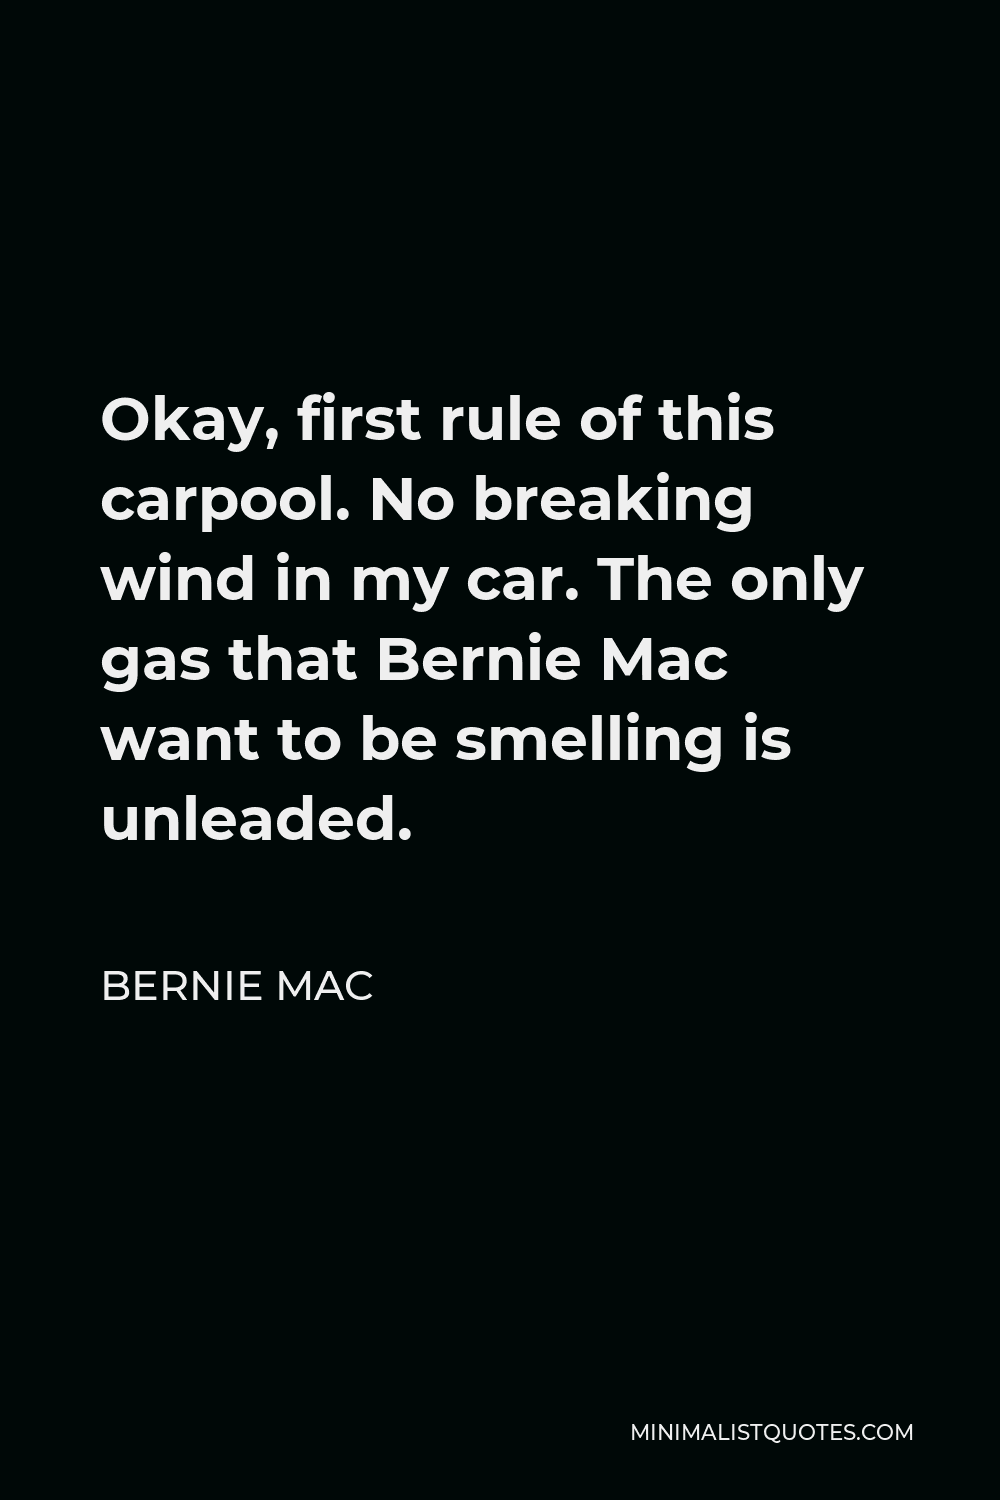 Bernie Mac Quote - Okay, first rule of this carpool. No breaking wind in my car. The only gas that Bernie Mac want to be smelling is unleaded.